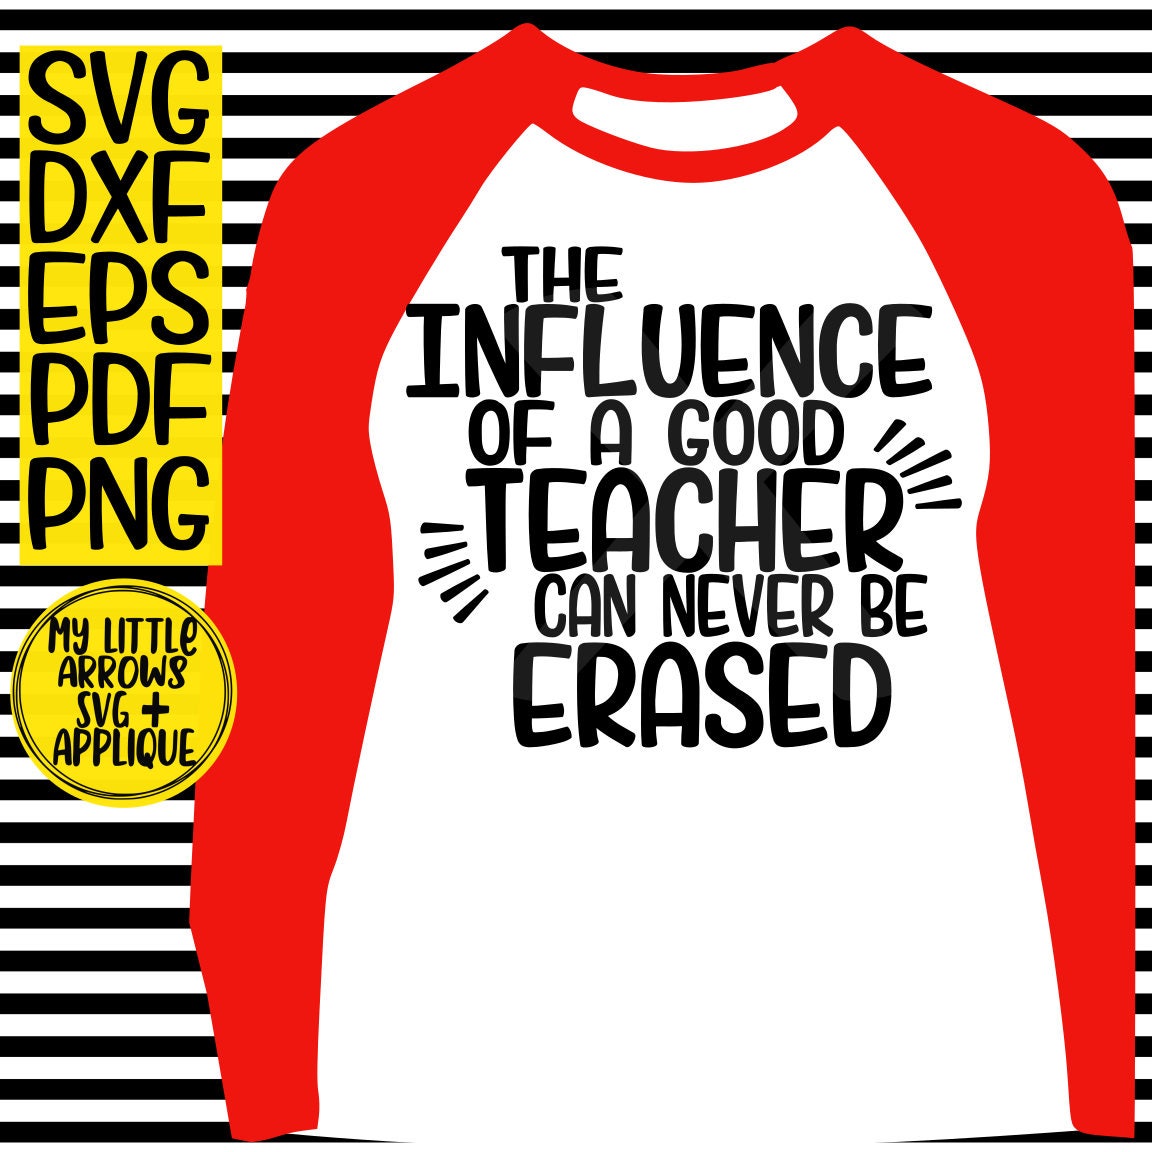 Download The influence of a teacher SVG DXF EPS png Cricut